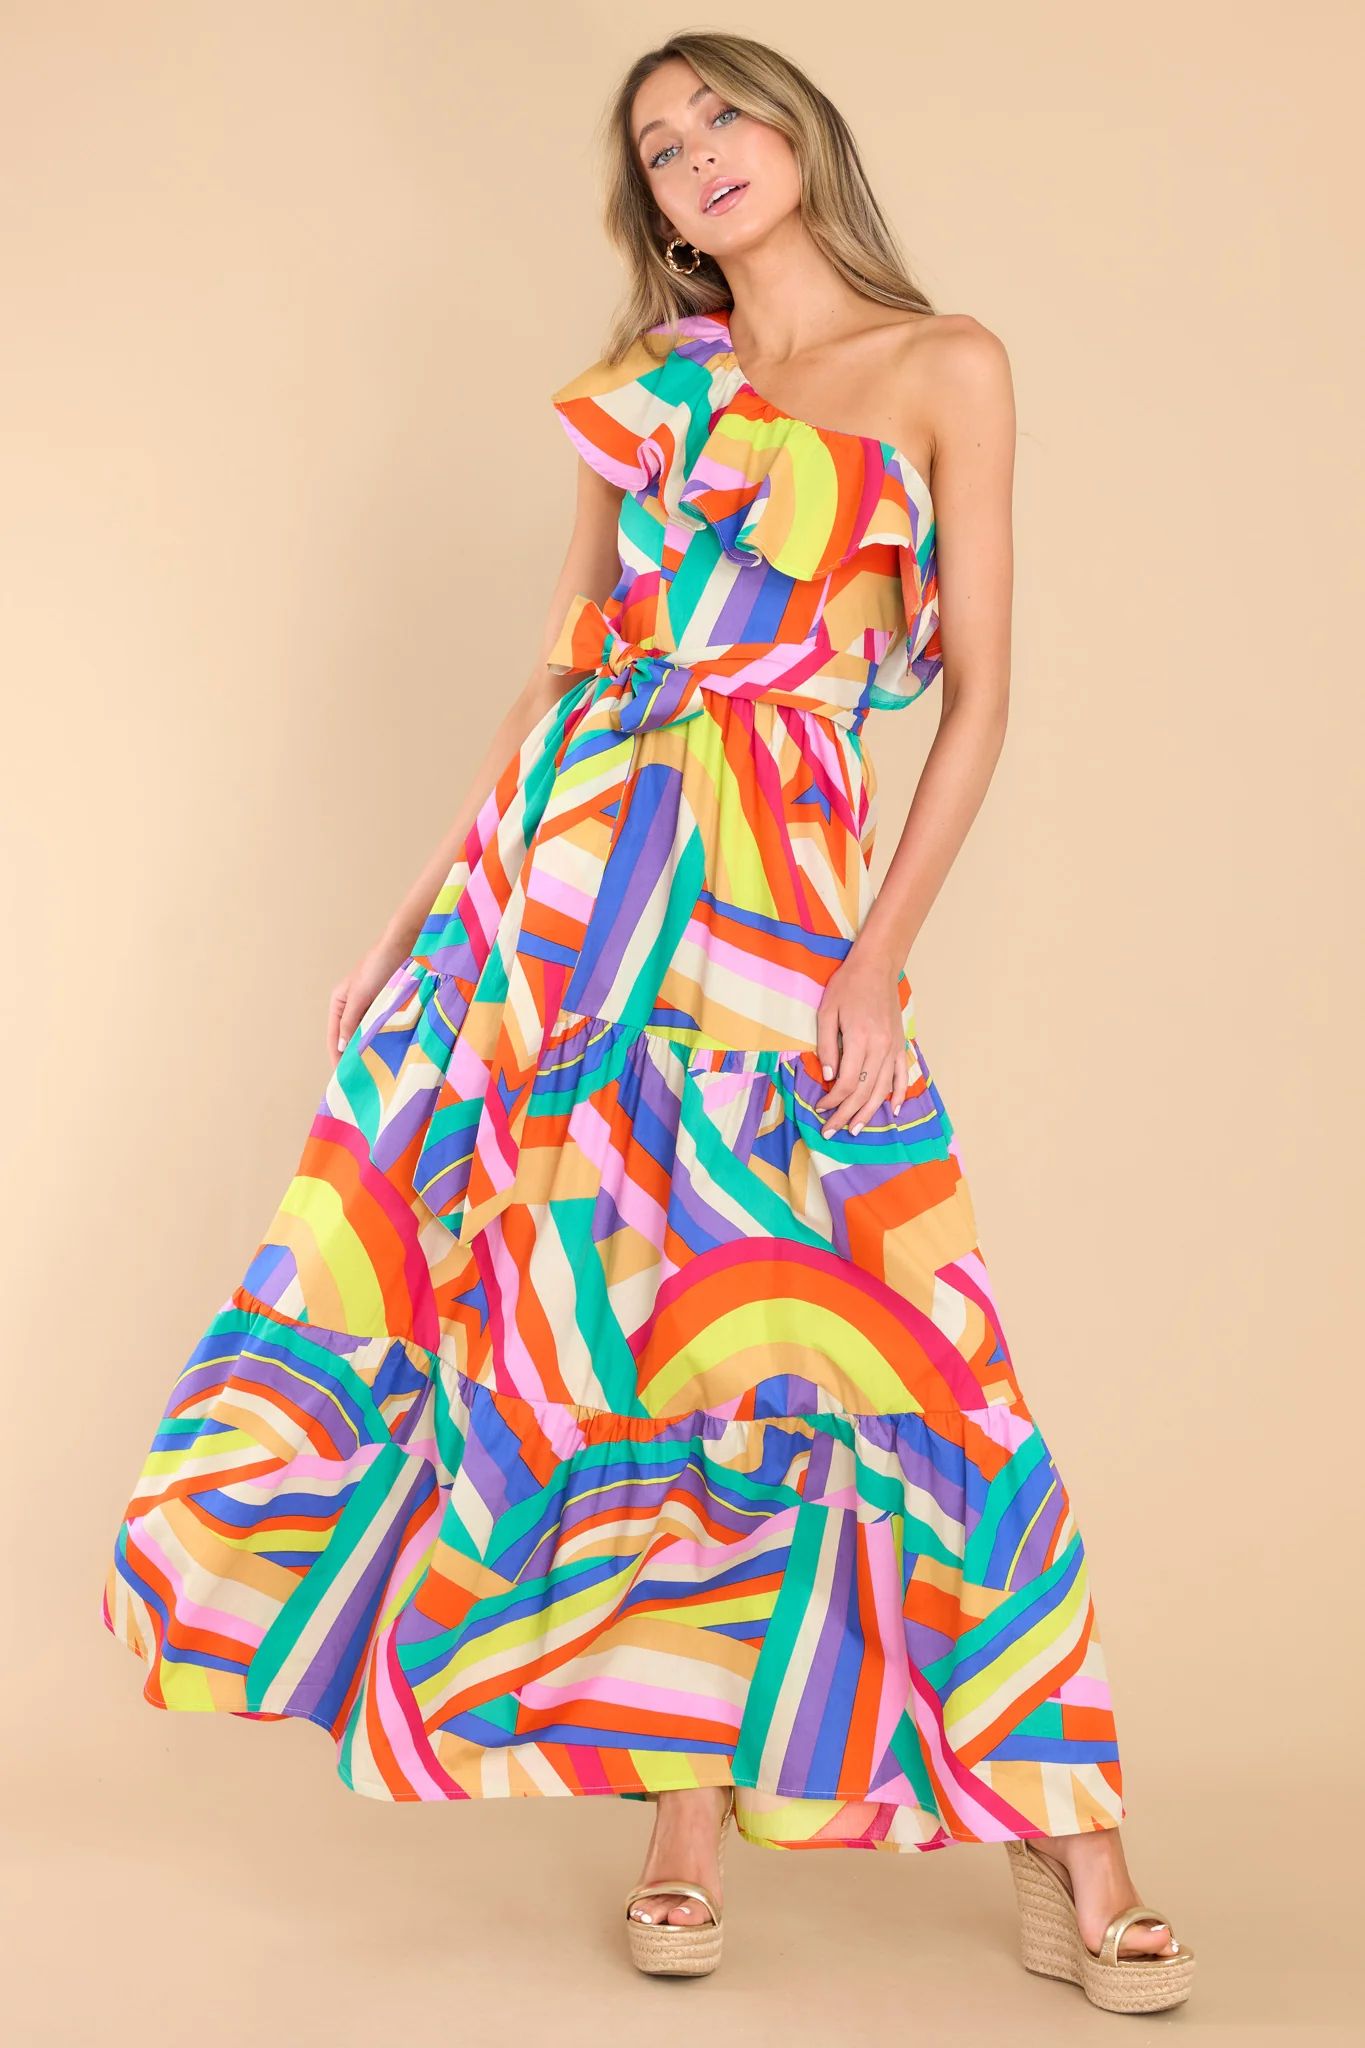 None Can Compare Rainbow Print Maxi Dress | Red Dress 